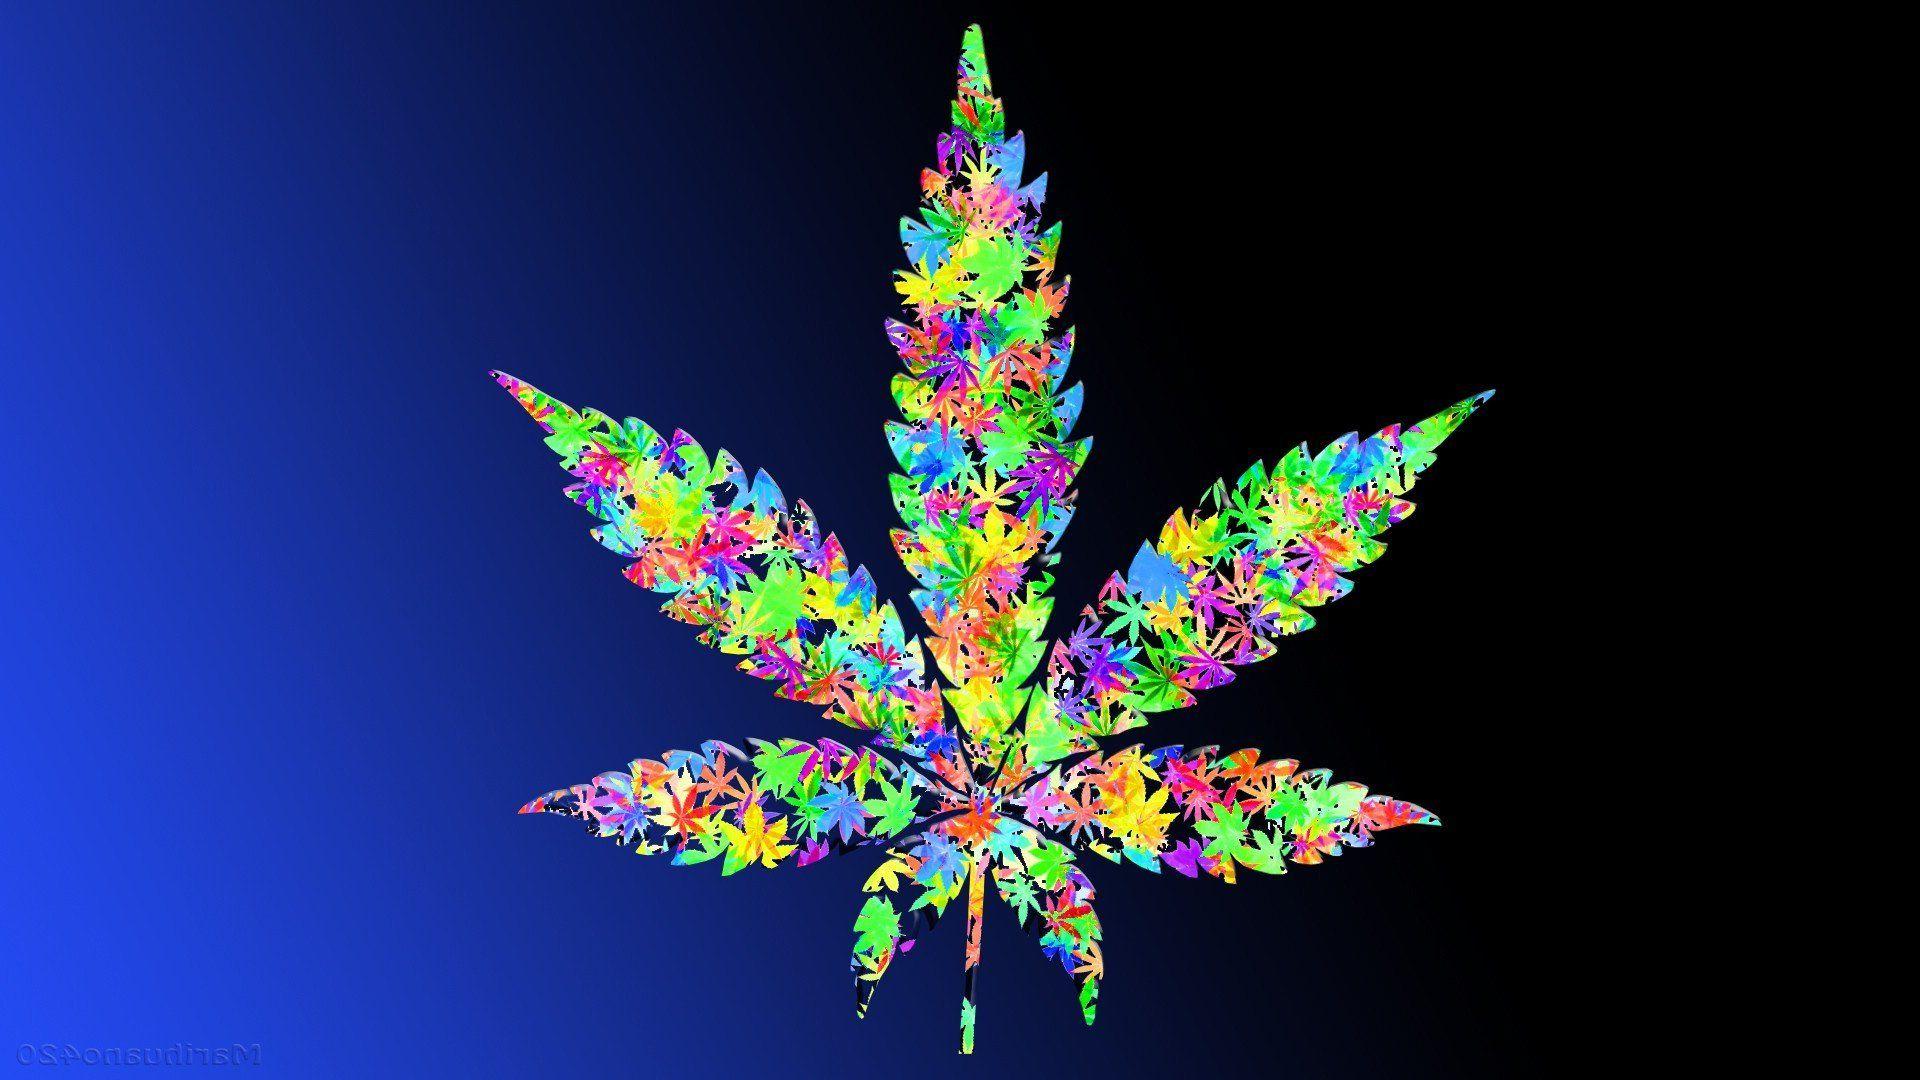 HD Weed Widescreen 1080P Wallpapers - Top Free HD Weed Widescreen 1080P